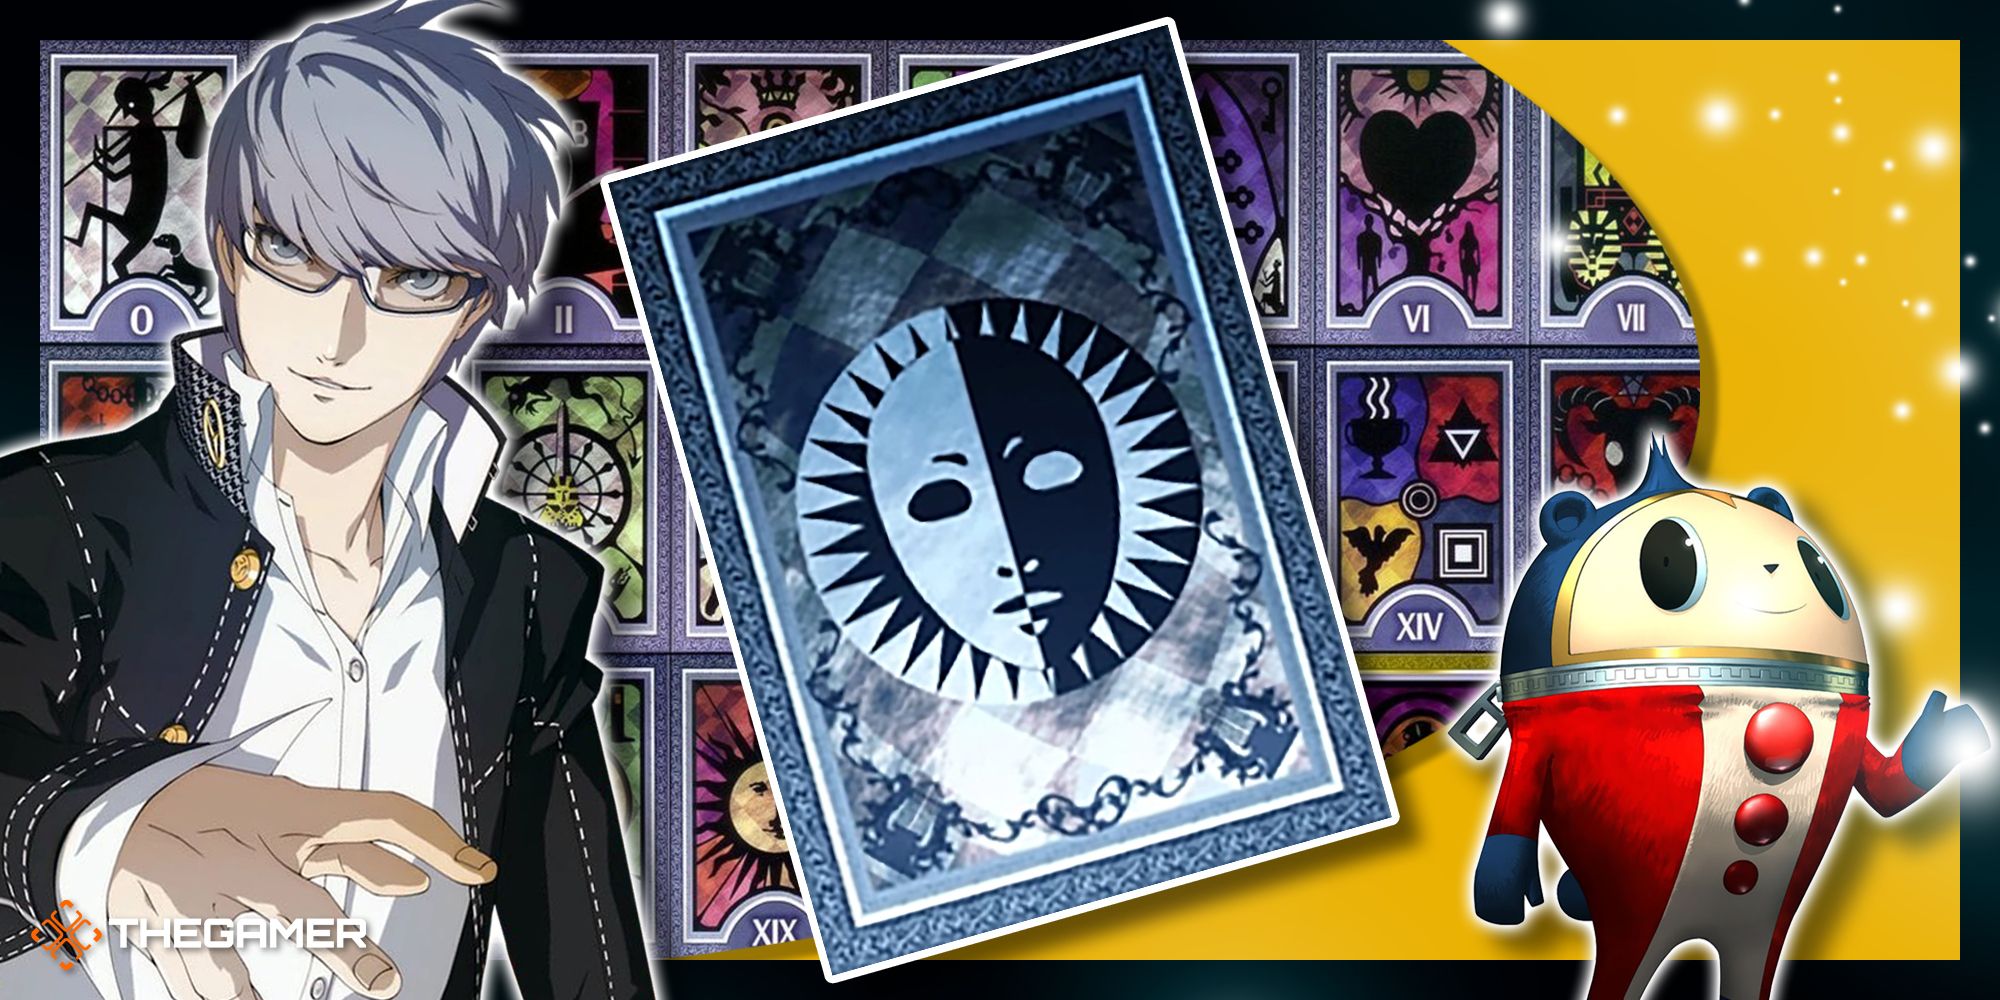 persona 4 golden's arcana cards with the standard tarot card in the center